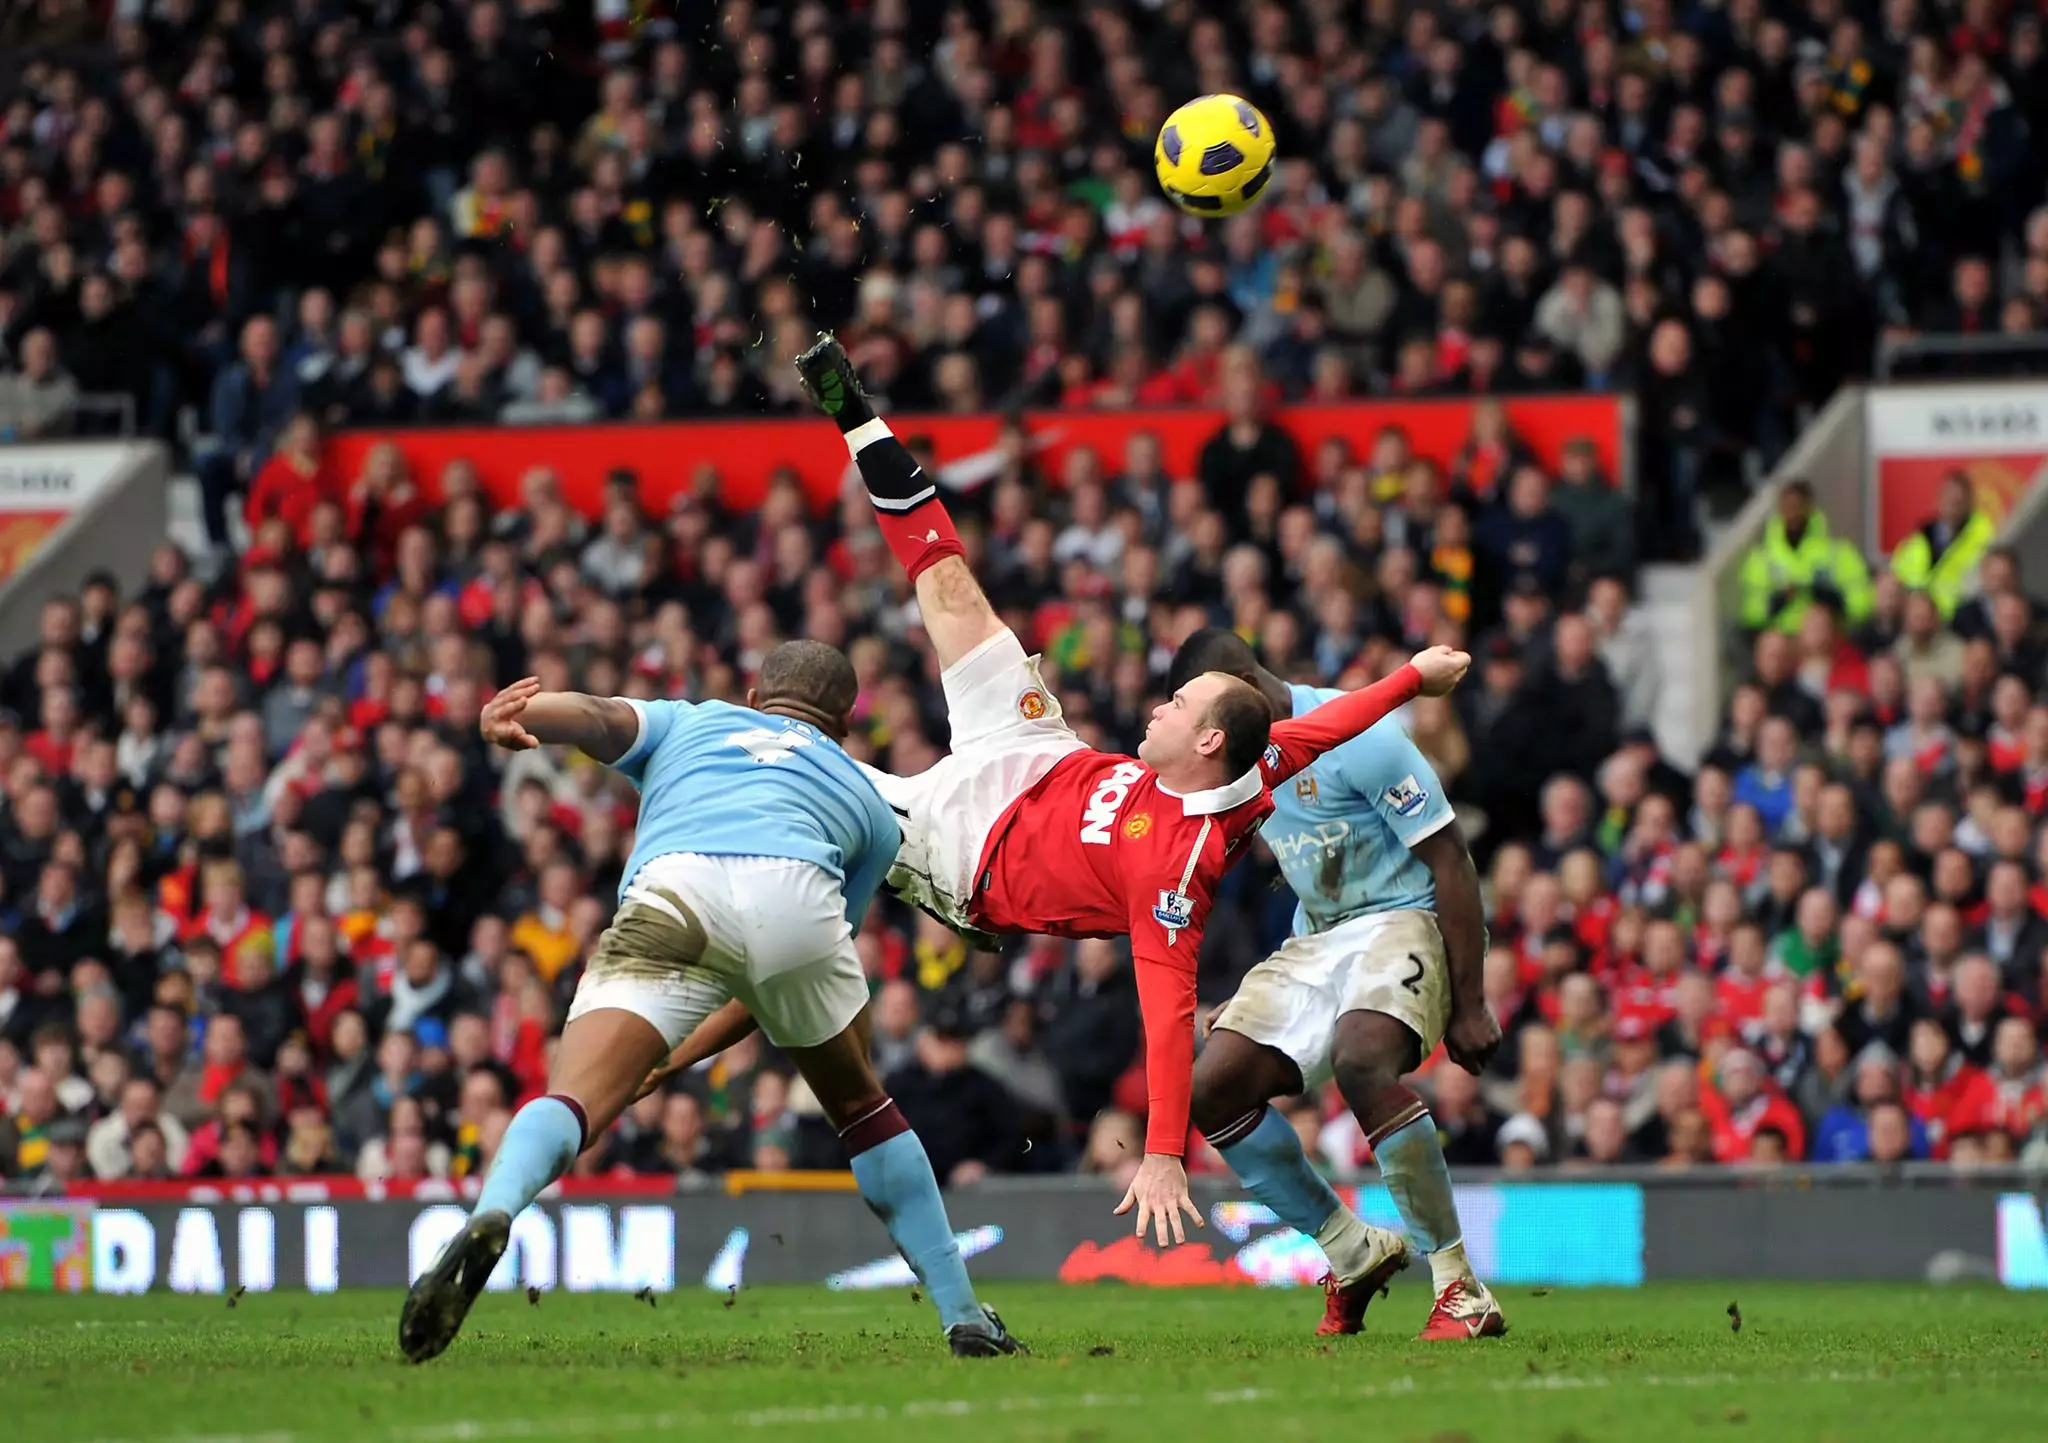 Rooney scores for United against City. Image: PA